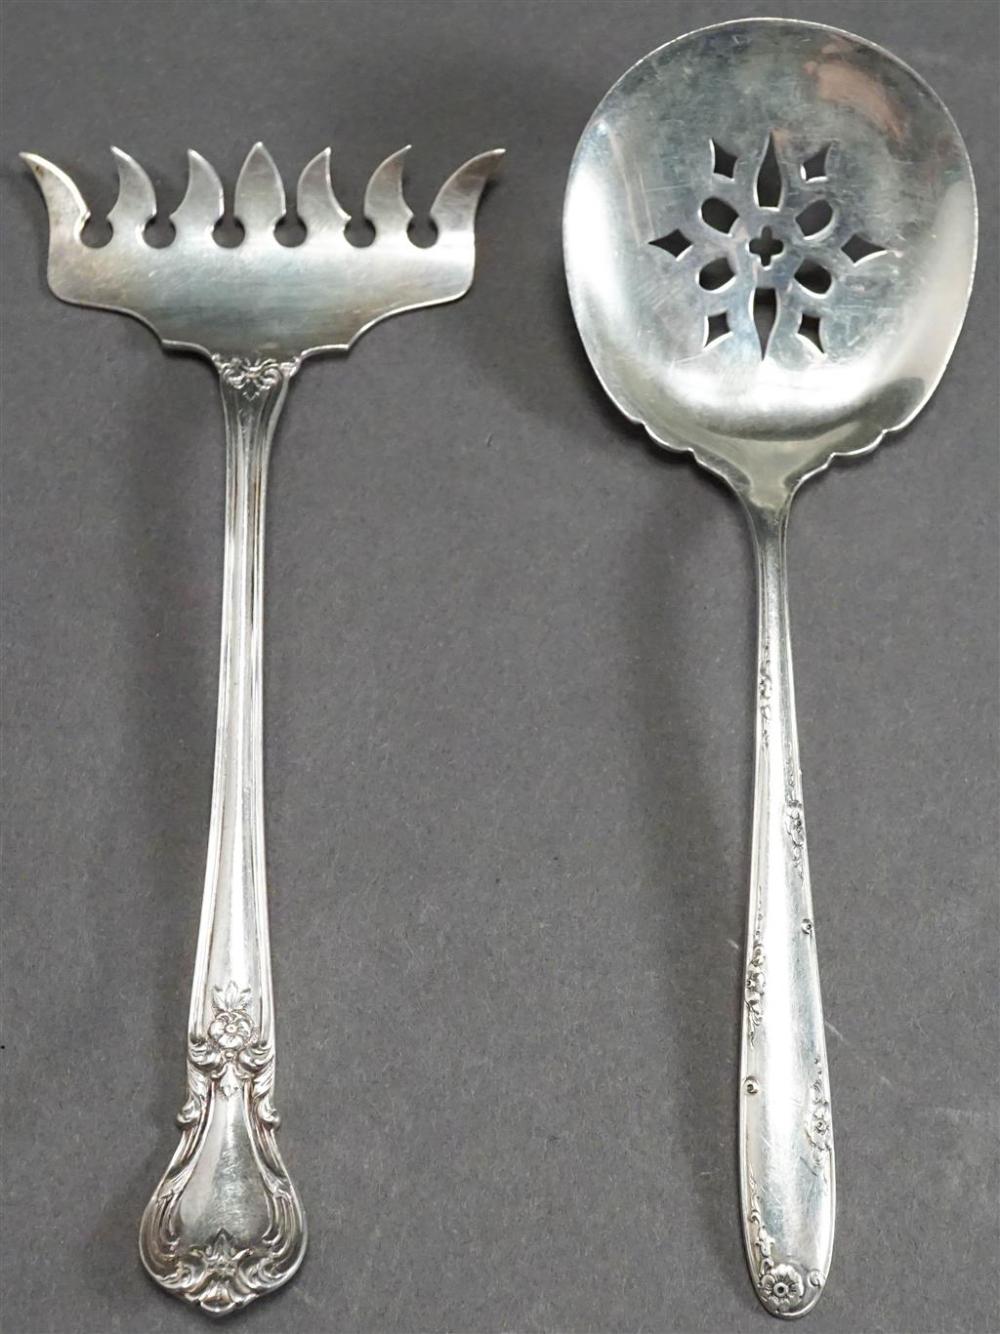 TOWLE MADEIRA PATTERN JELLY SPOON AND